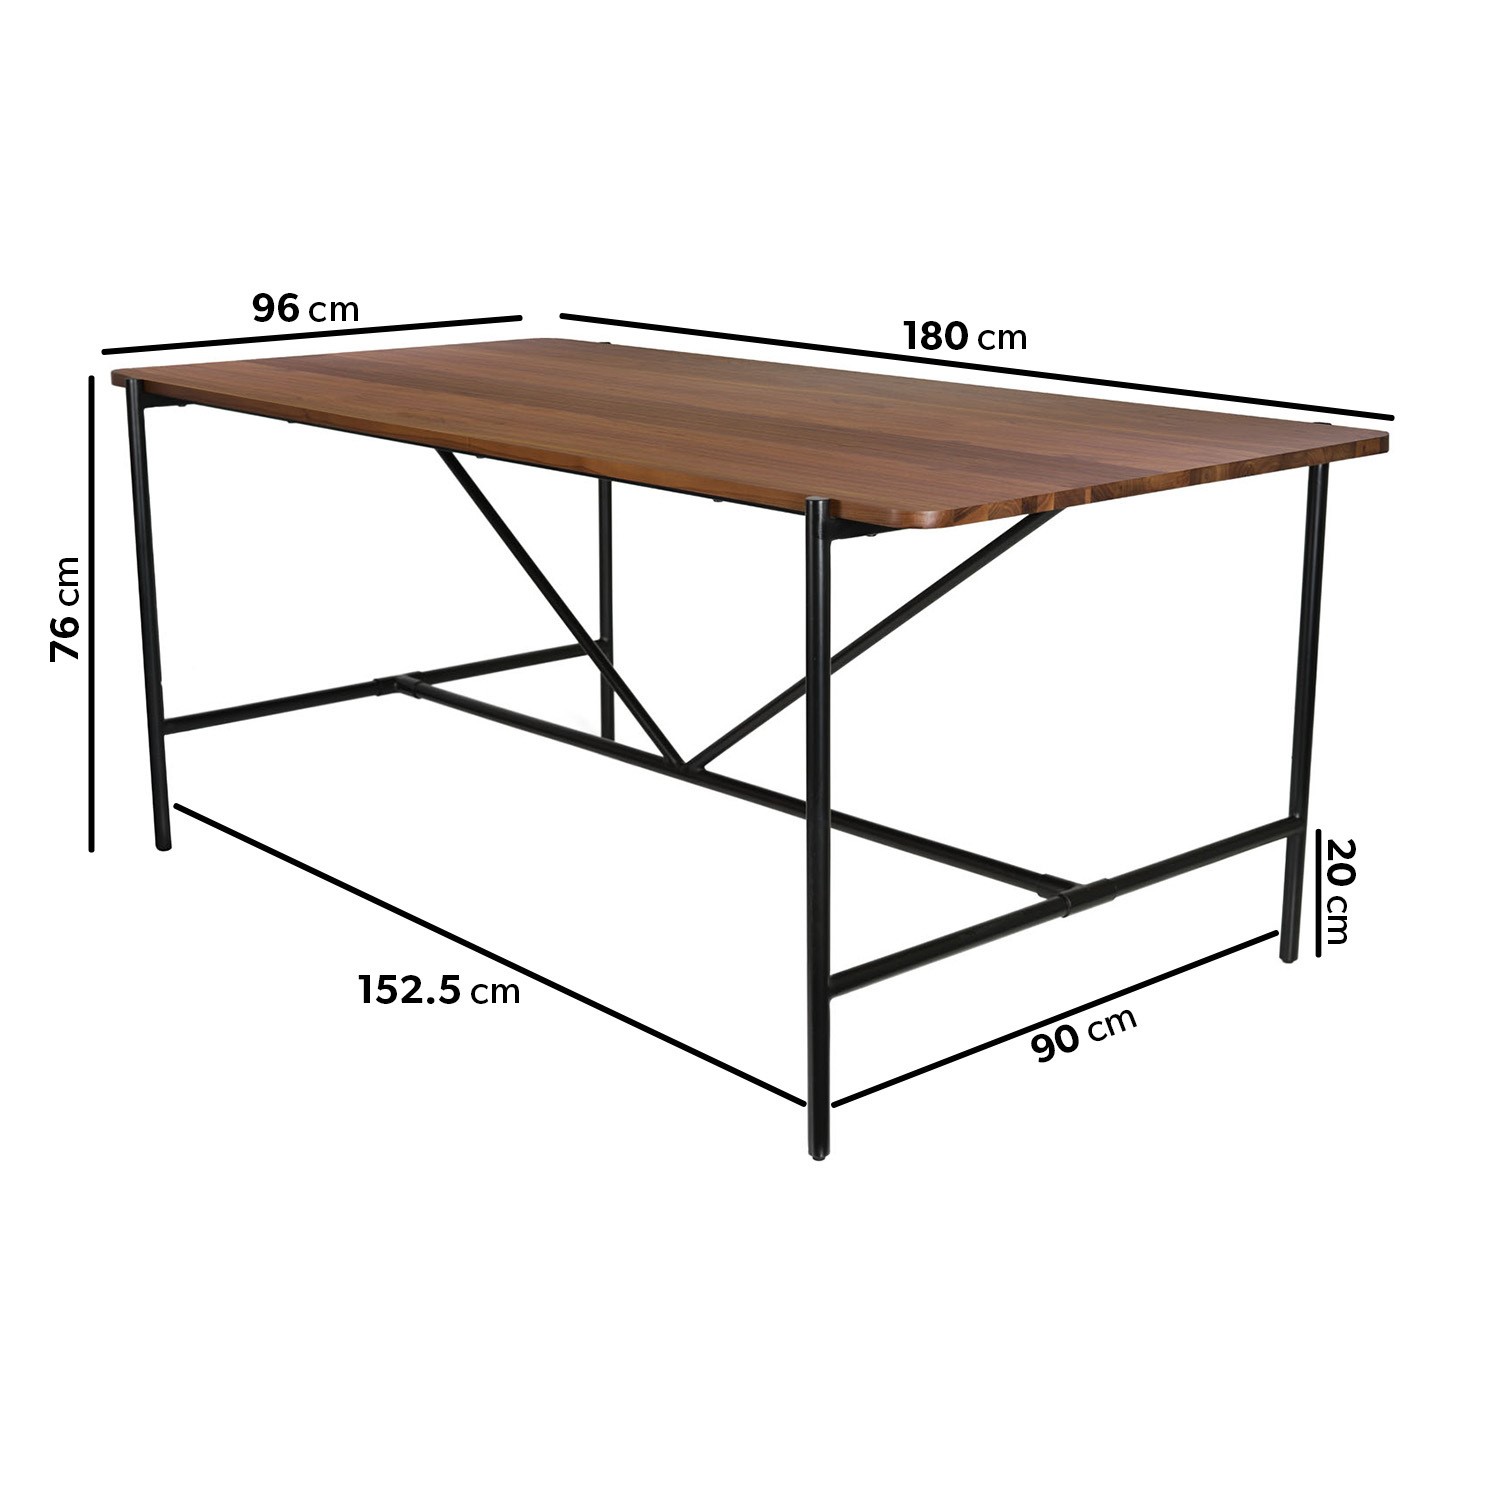 Read more about Industrial walnut dining table with black legs seats 6 cooper